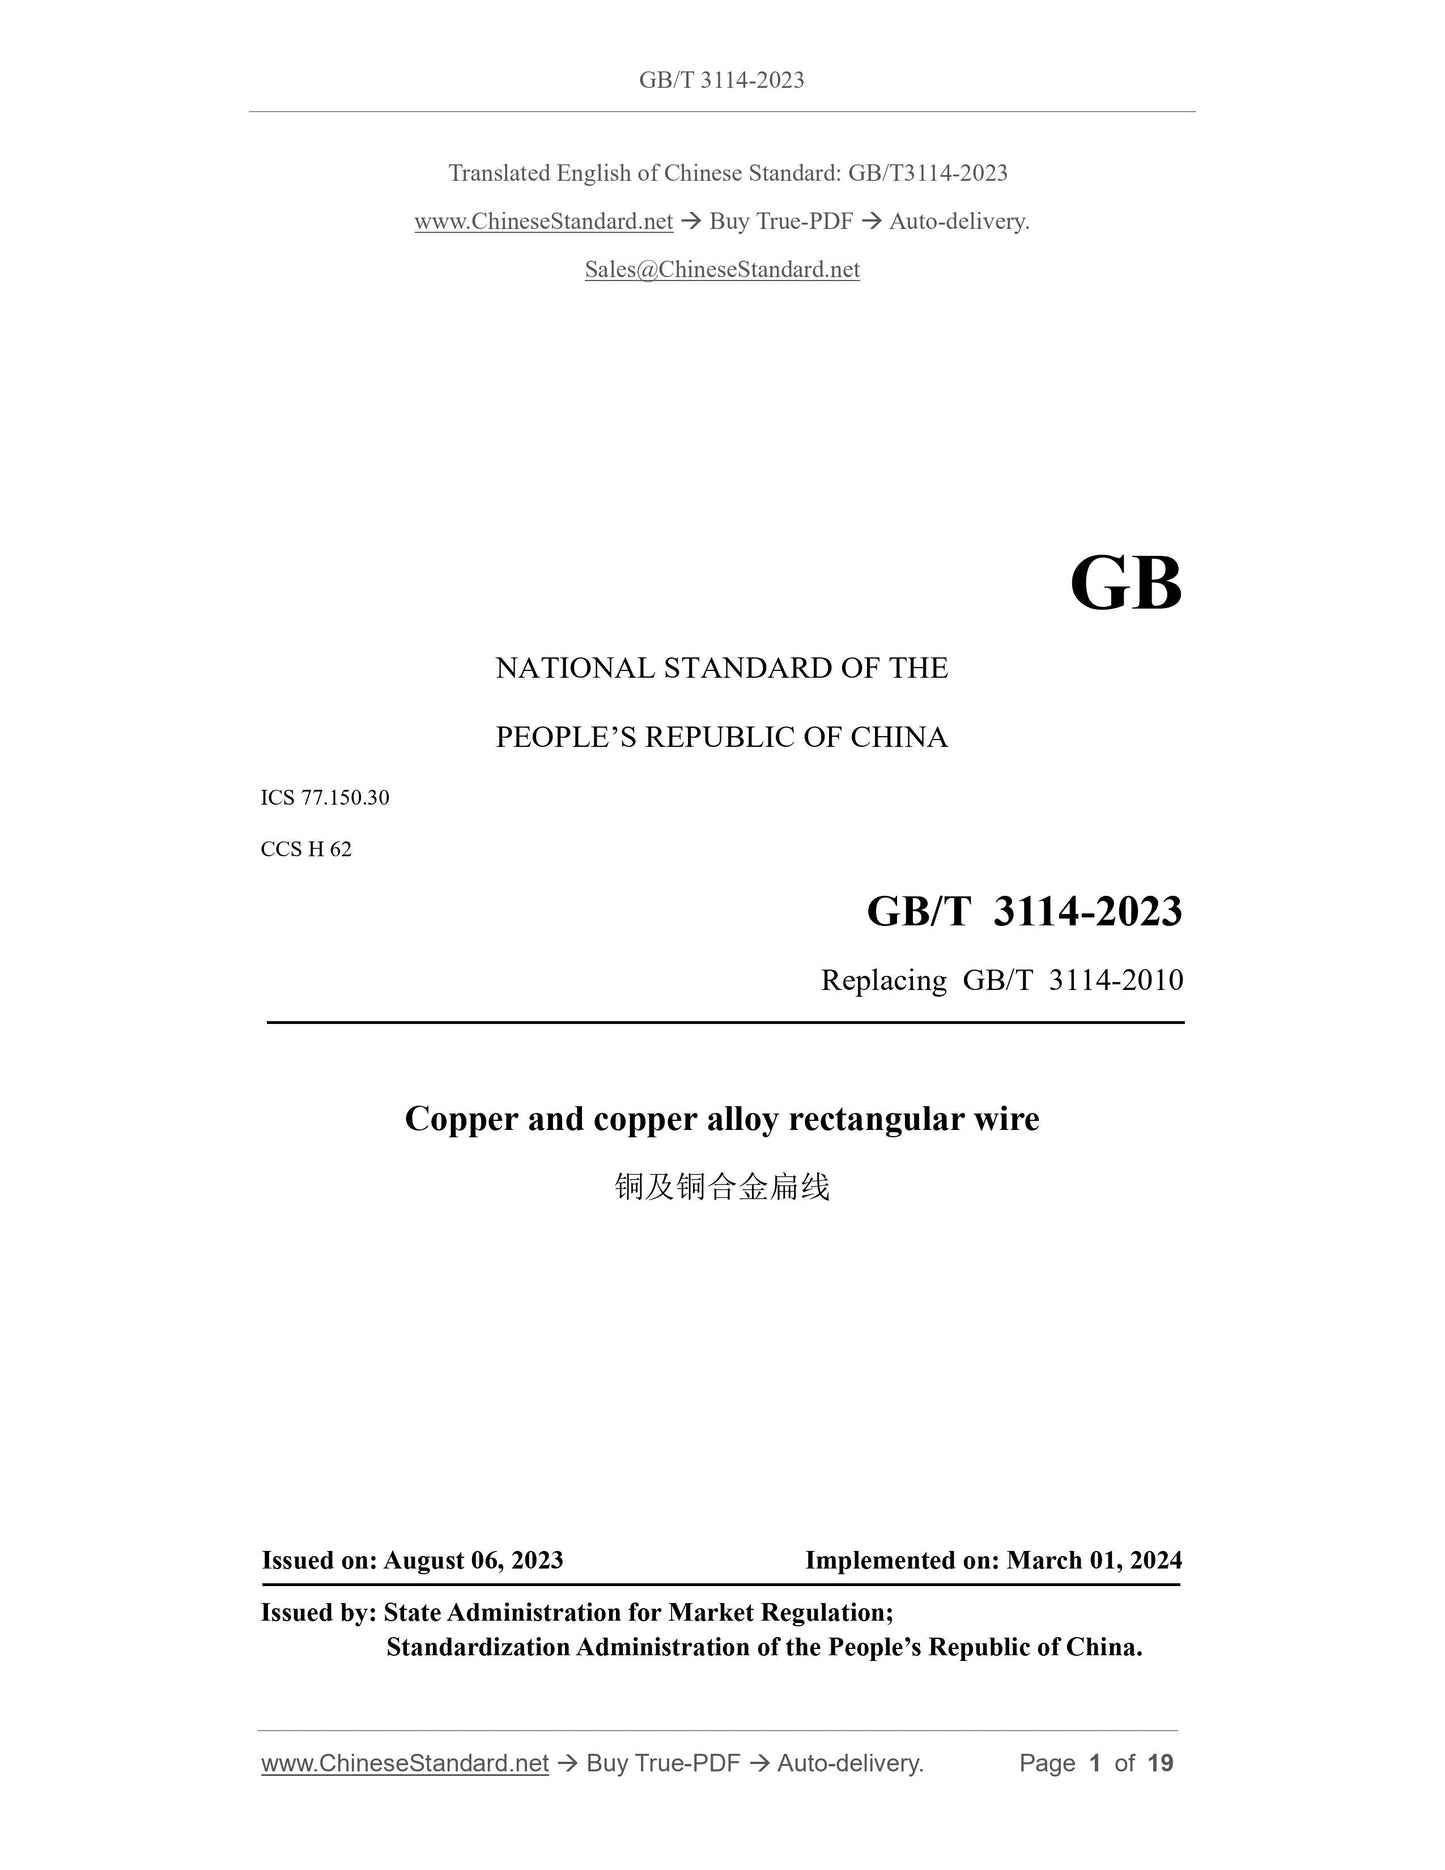 GB/T 3114-2023 Page 1